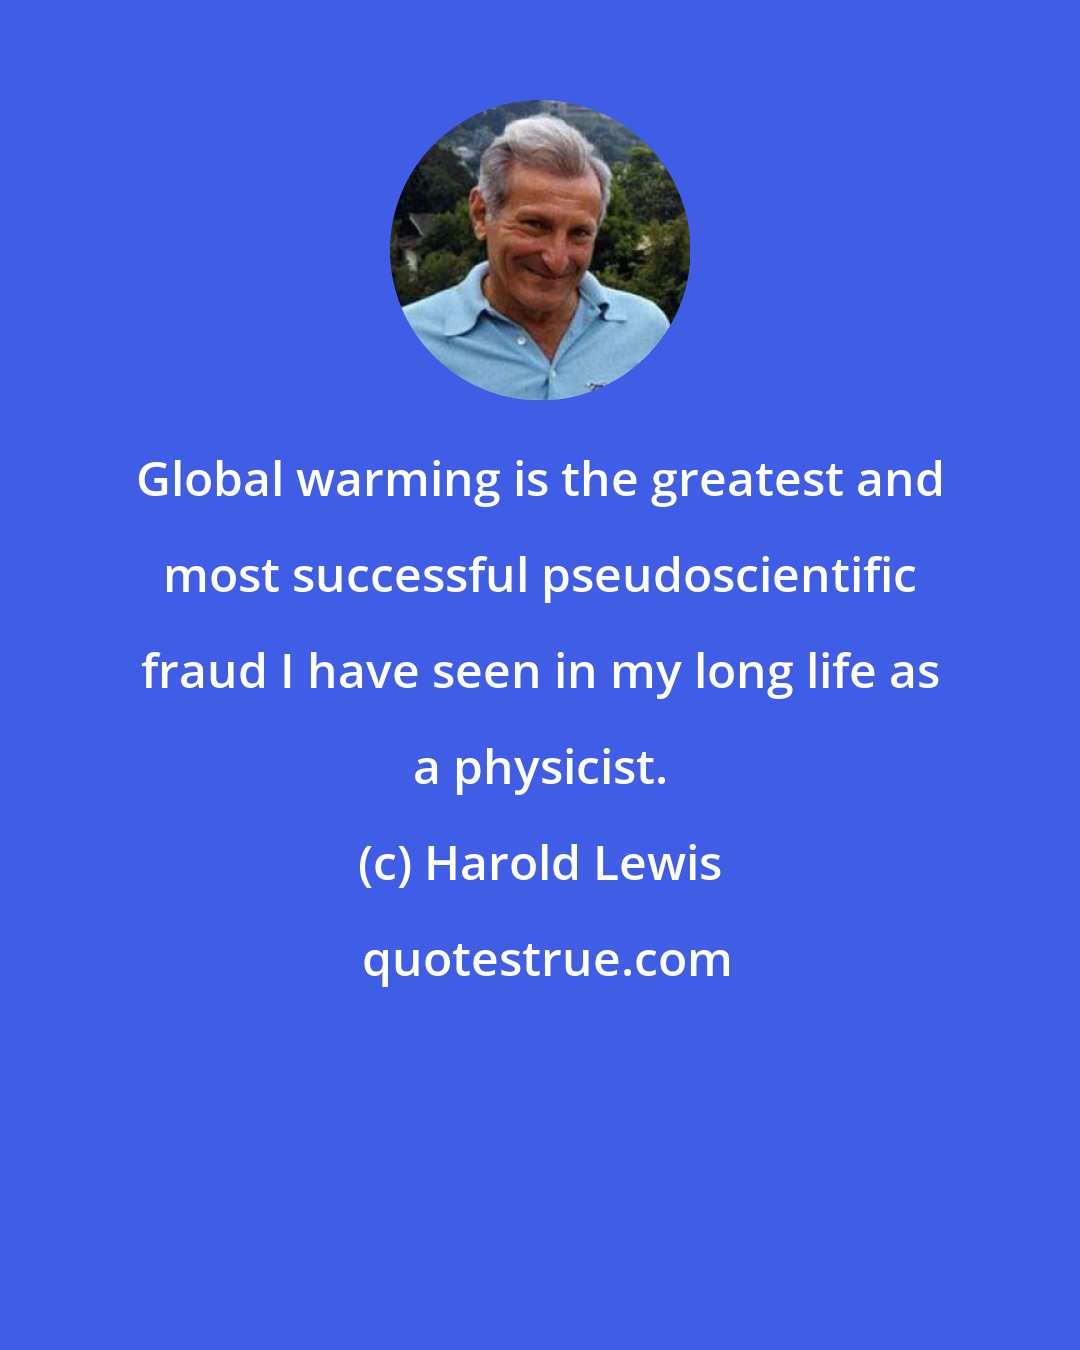 Harold Lewis: Global warming is the greatest and most successful pseudoscientific fraud I have seen in my long life as a physicist.